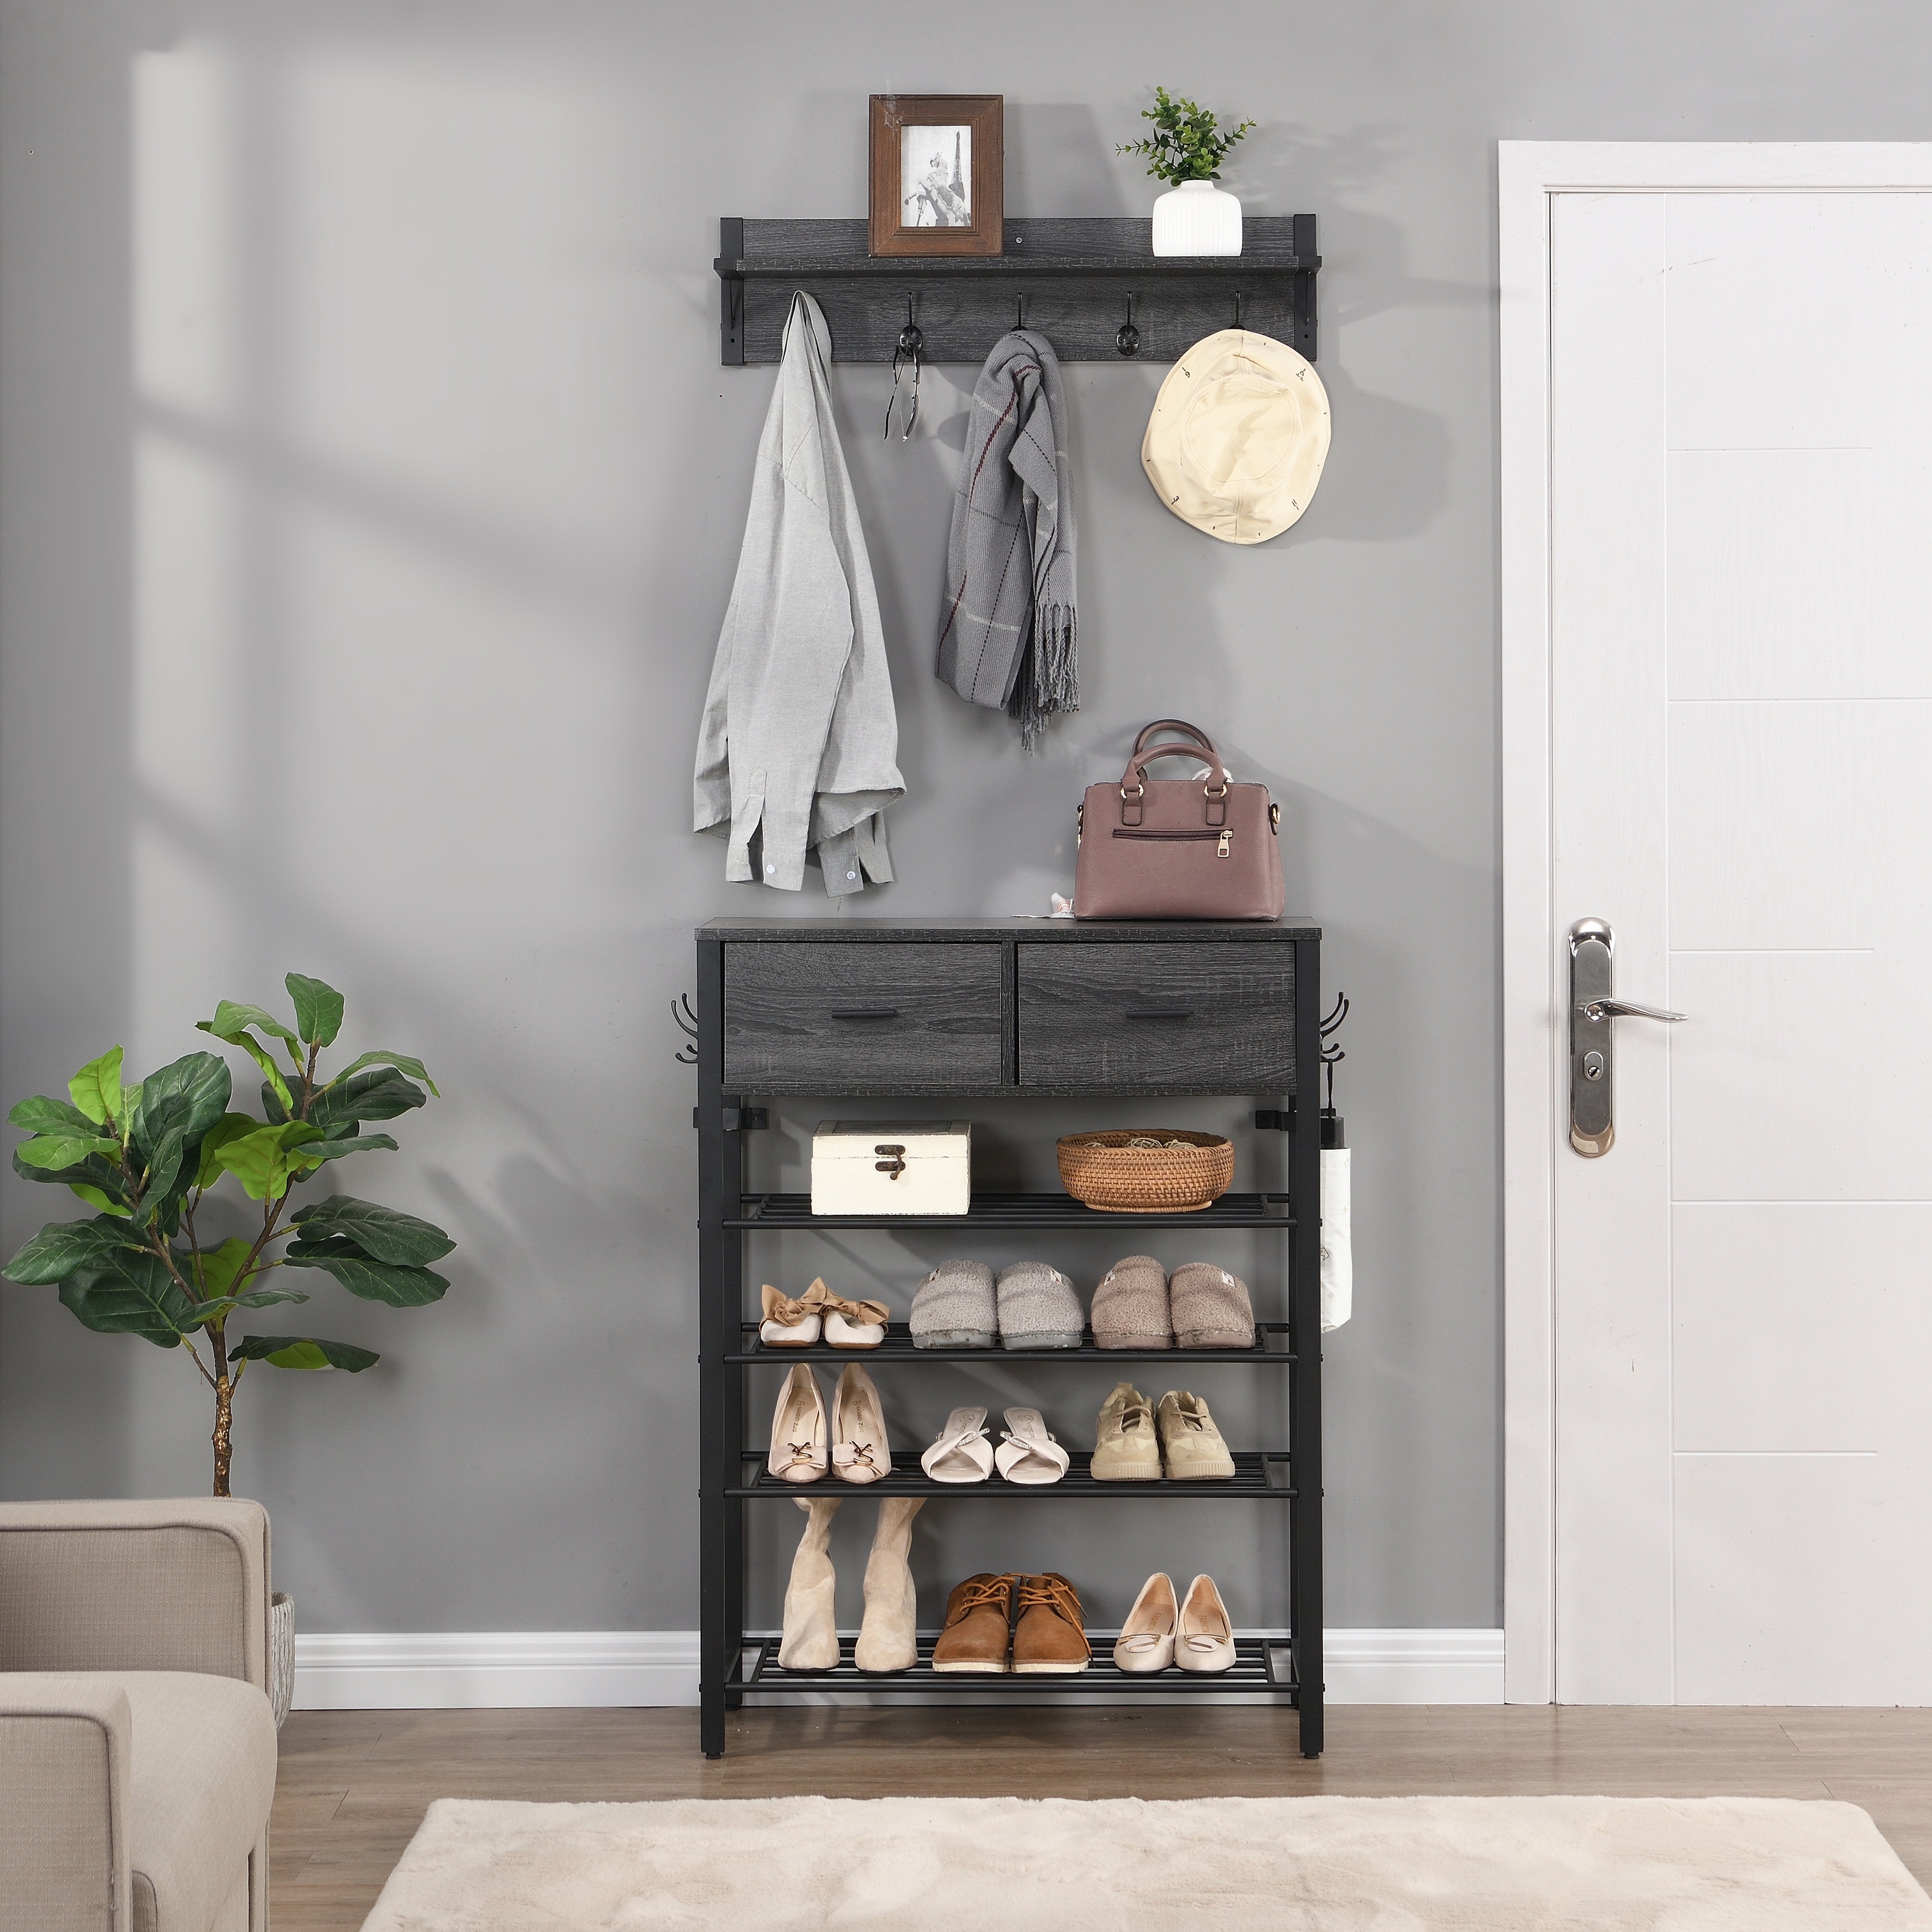 https://ak1.ostkcdn.com/images/products/is/images/direct/a4b6a405bf4acfe156d9dcc6e83dbe9e22ff9274/Entryway-4-tier-Shoe-Shelf-with-Two-Drawers-and-Coat-Rack%2C-One-Set-Entryway-Show-Rack-with-Storage-and-Hooks.jpg